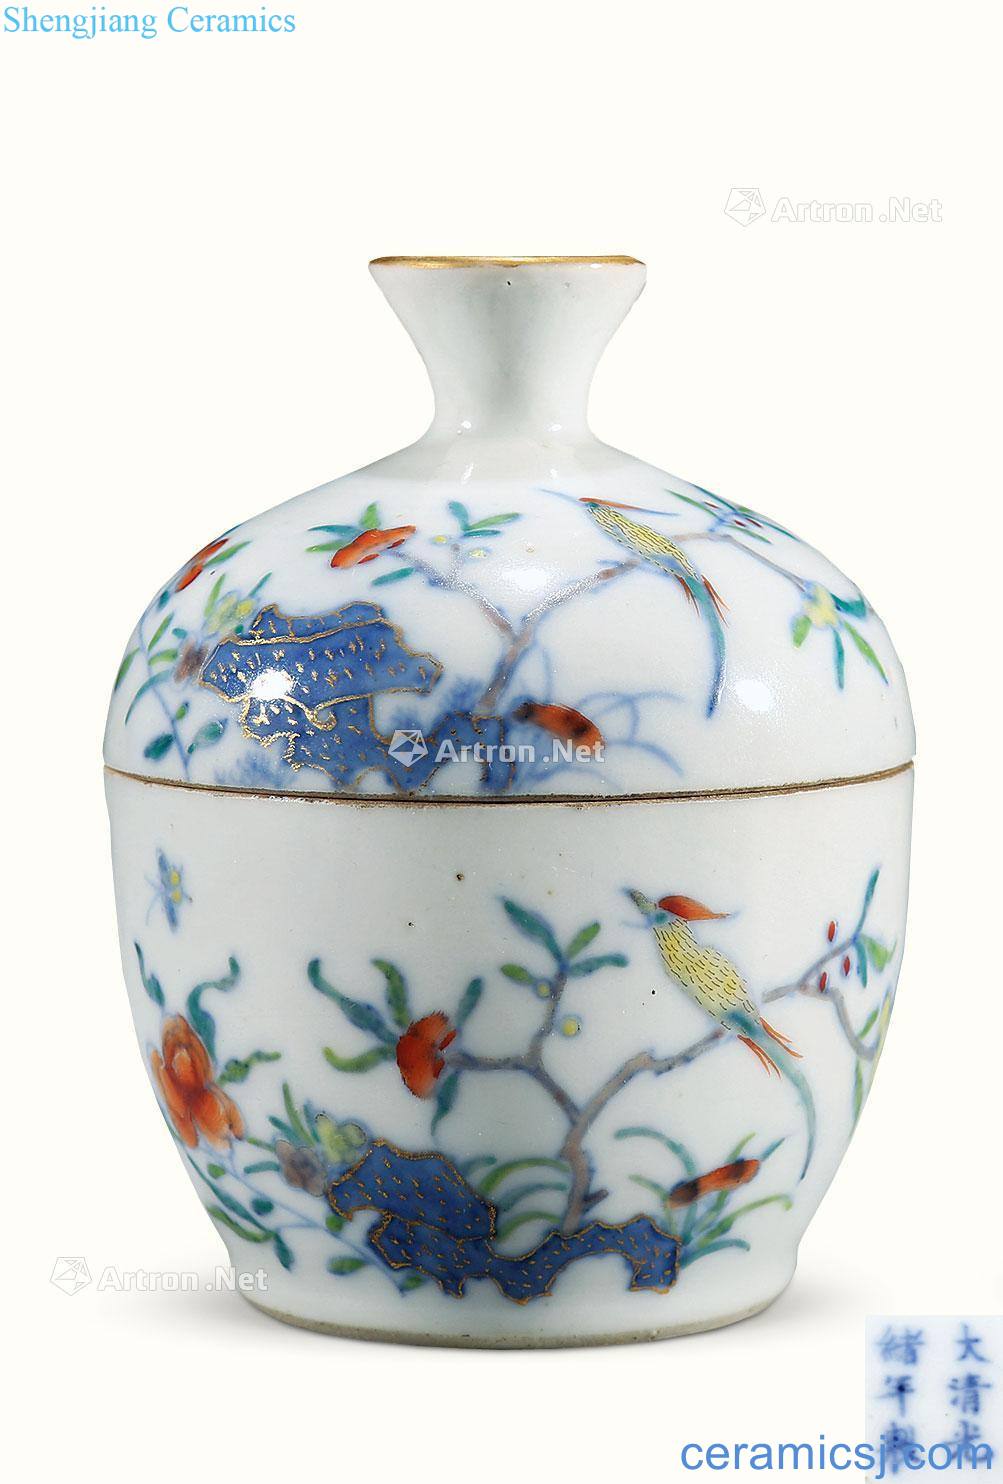 Qing guangxu Bucket color painting of flowers and grain cover tank